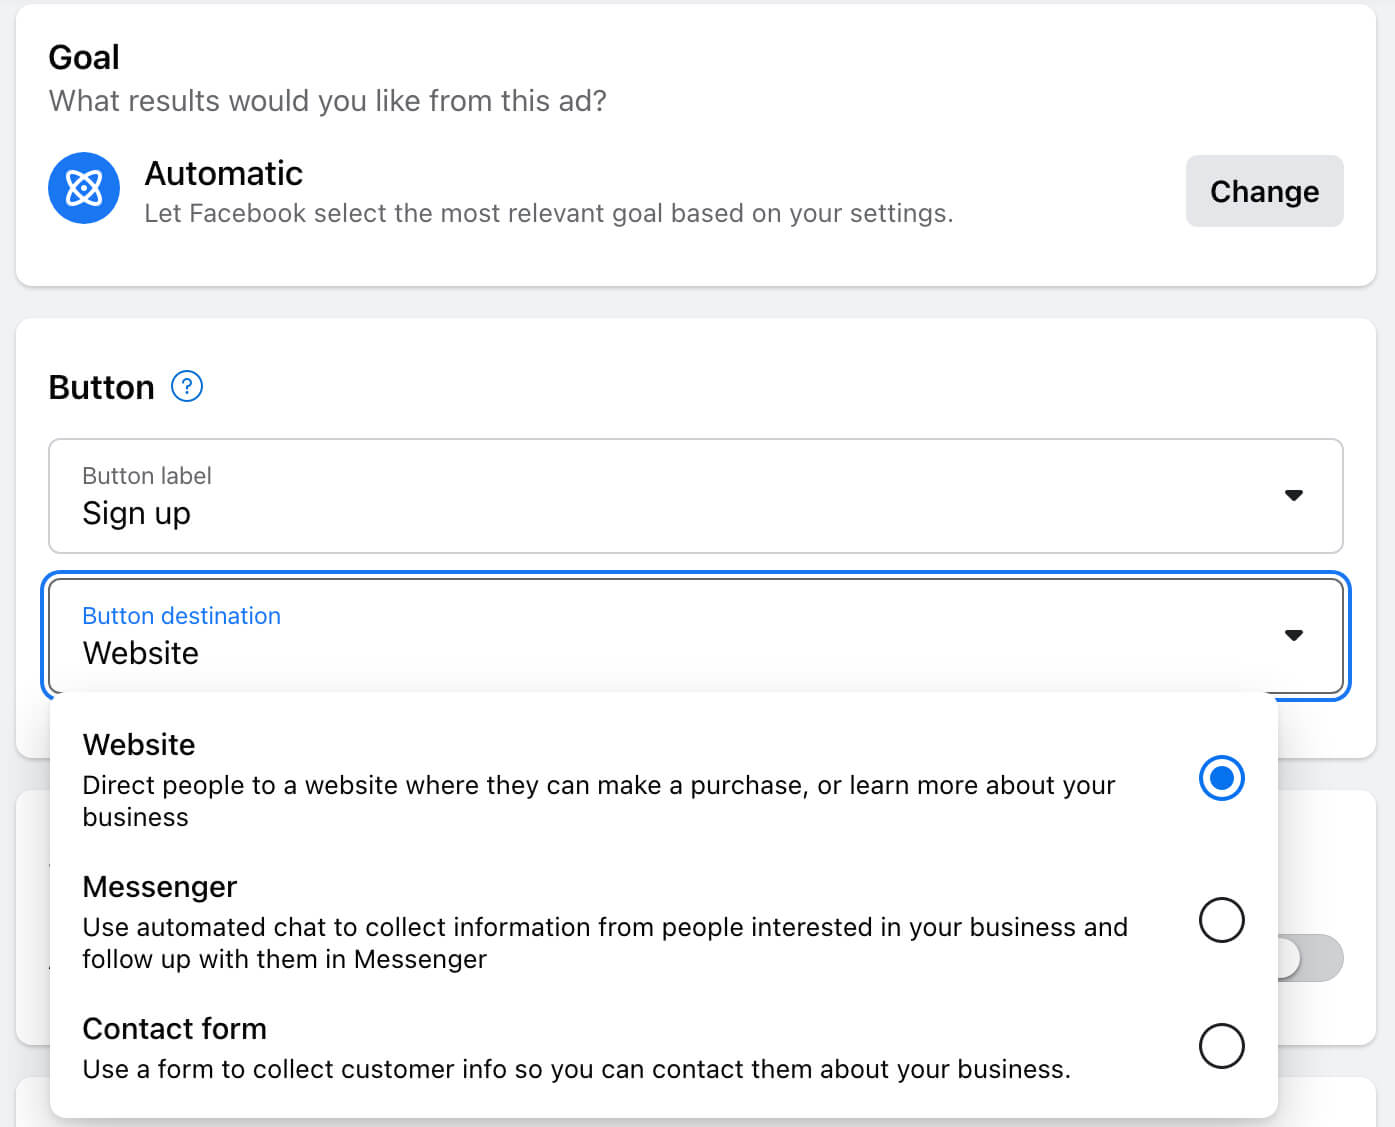 how-to-boost-high-performing-organic-posts-on-facebook-automate-goal-based-on-your-settings-sign-up-cta-call-to-action-specify-destination-example-13